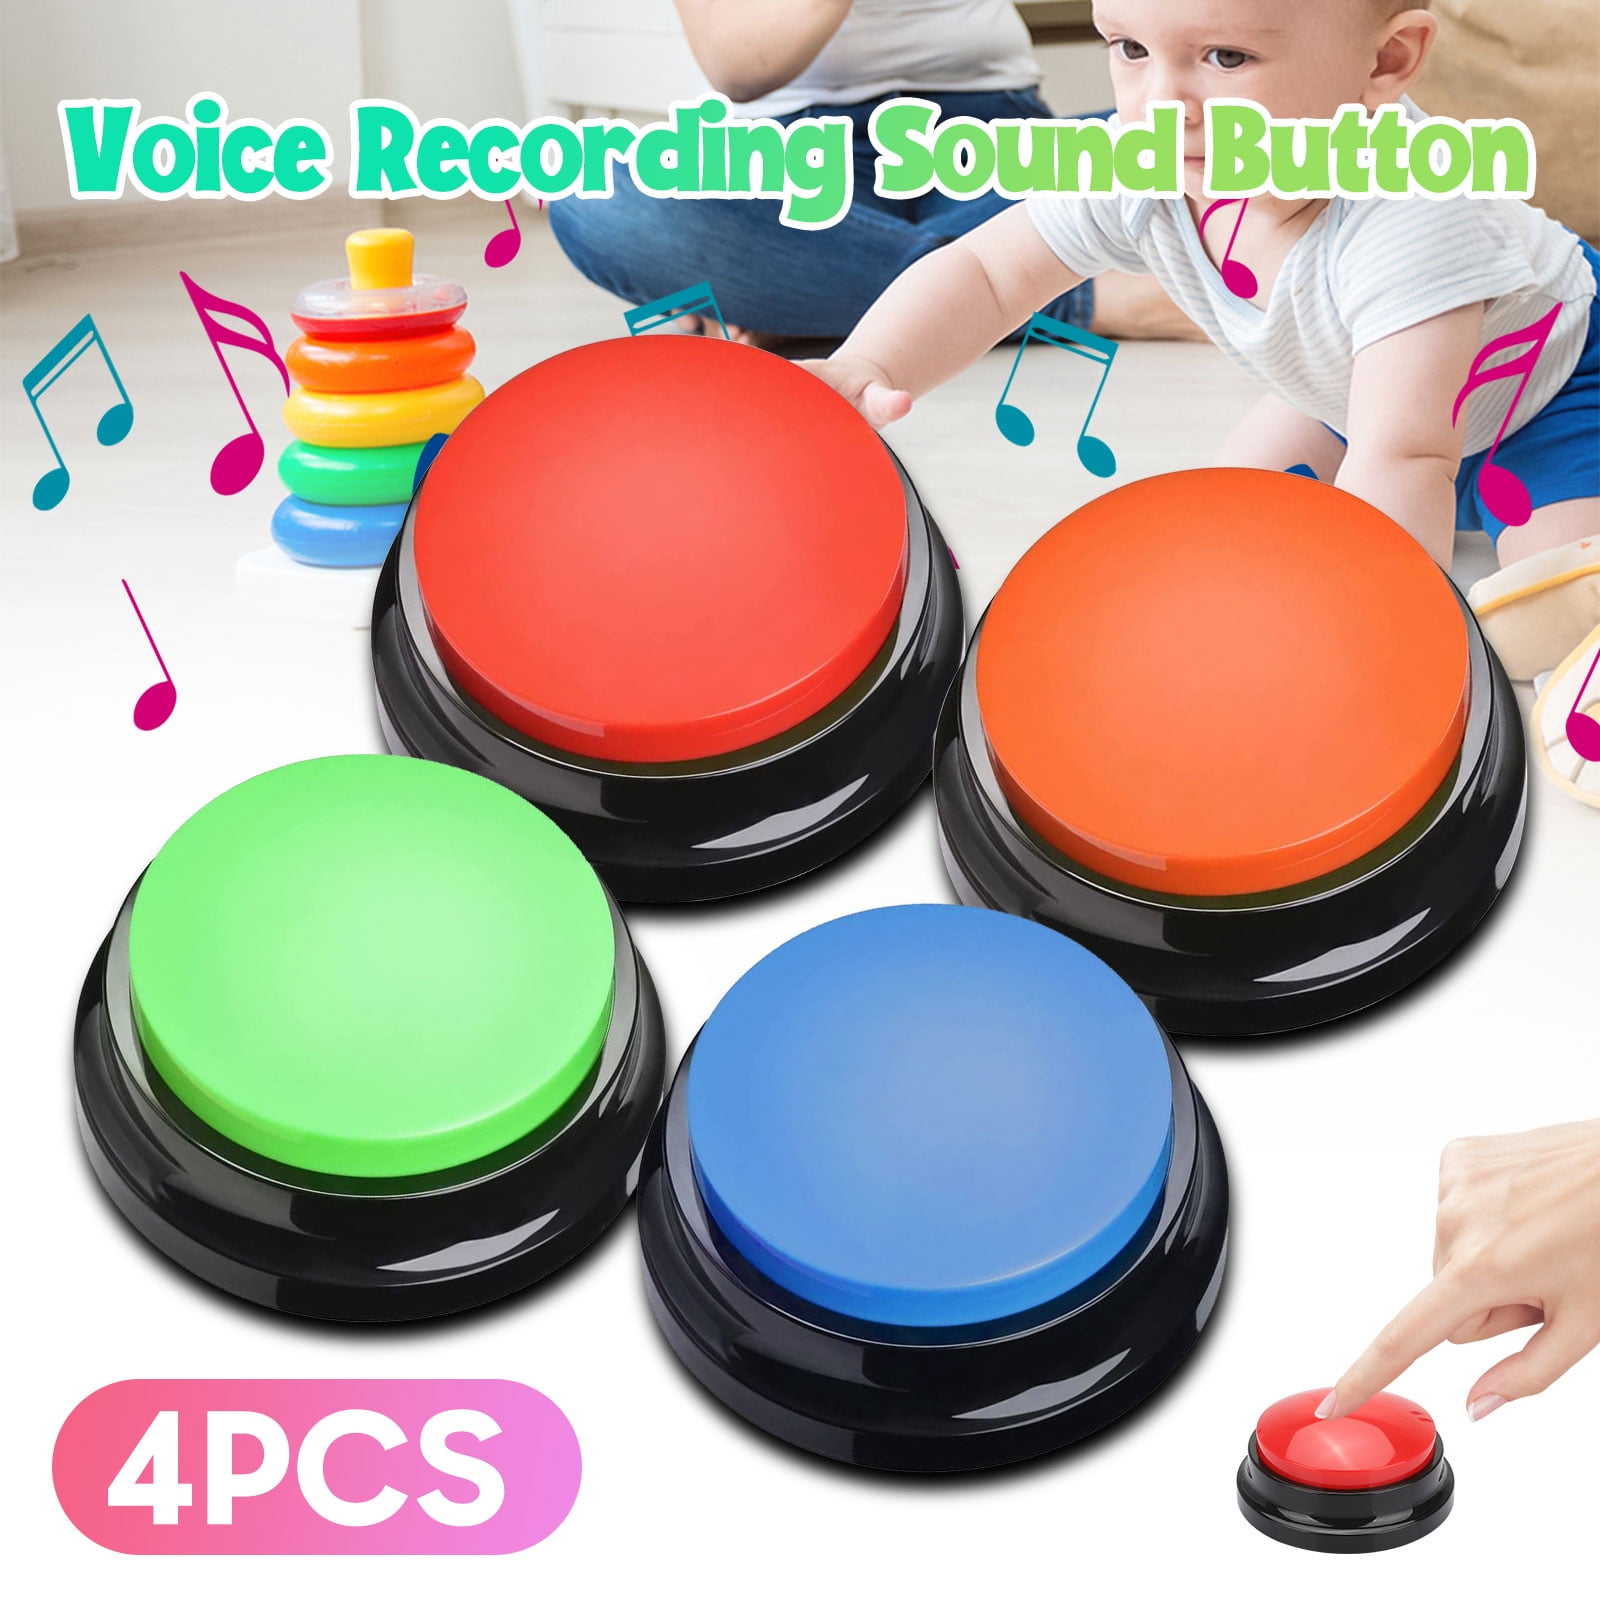 Voice Recording Sound Button, EEEkit Recordable Talking Button, Answer  Colored Buzzers, Record & Playback Your Own Message, Pet Training Buzzer,  Funny Gift for Study Office Home 